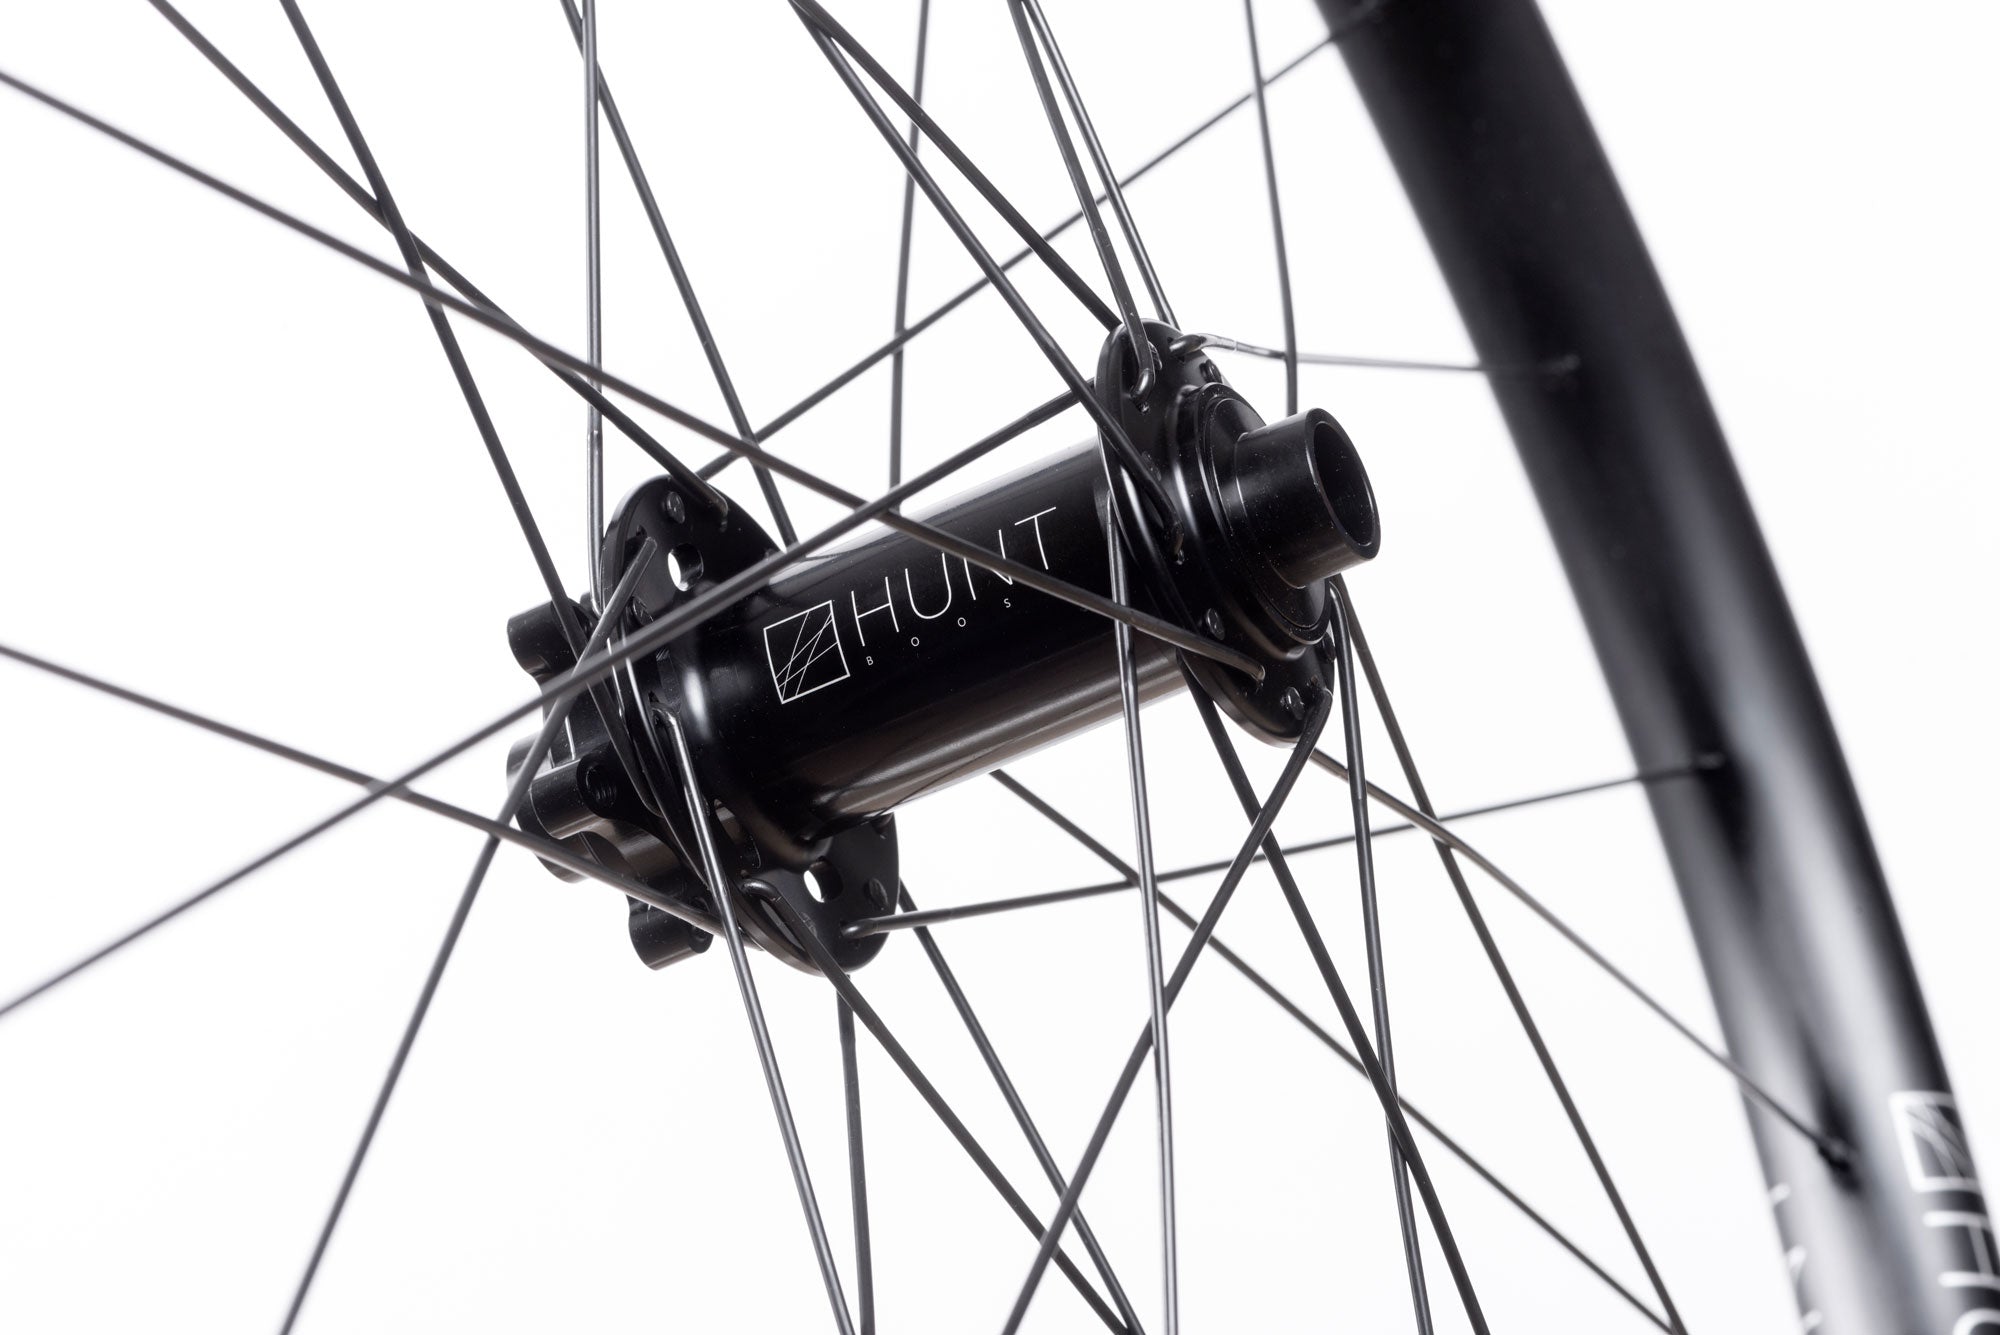 <h1>Front Hub</h1><i>Suited to match the needs of the modern trail bike rider. Featuring durable bearings and 7075-T6 series alloy axles to increase stiffness. These hubs have been selected based on their ability to perform on the most aggressive trails. </i>